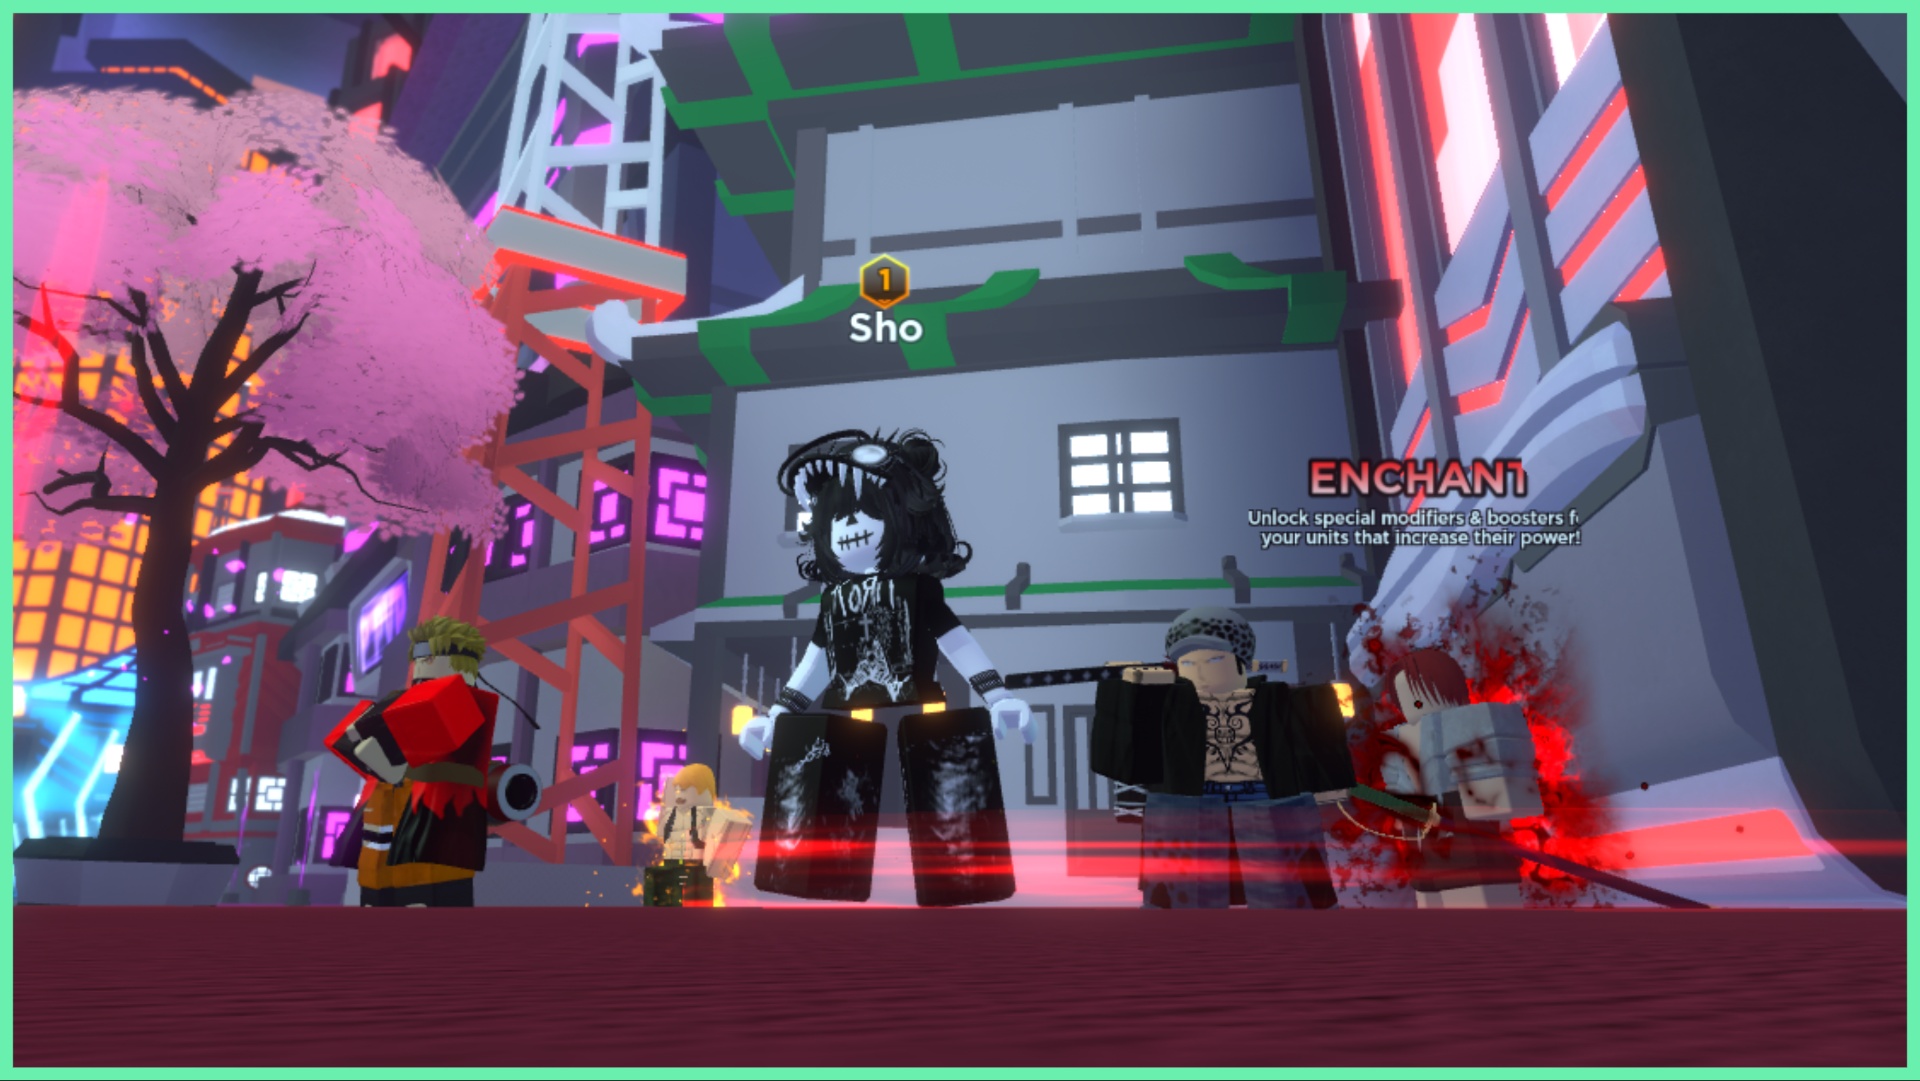 The image shows my avatar stood beside the enchant station at the main lobby. The lobby has a futuristic aesthetic with many LED screens and cyberpunk-vibes. Surrounding my avatar are her 4 units, and behind her is the Shanks NPC who has his iconic red hair and electrifying red wispy aura